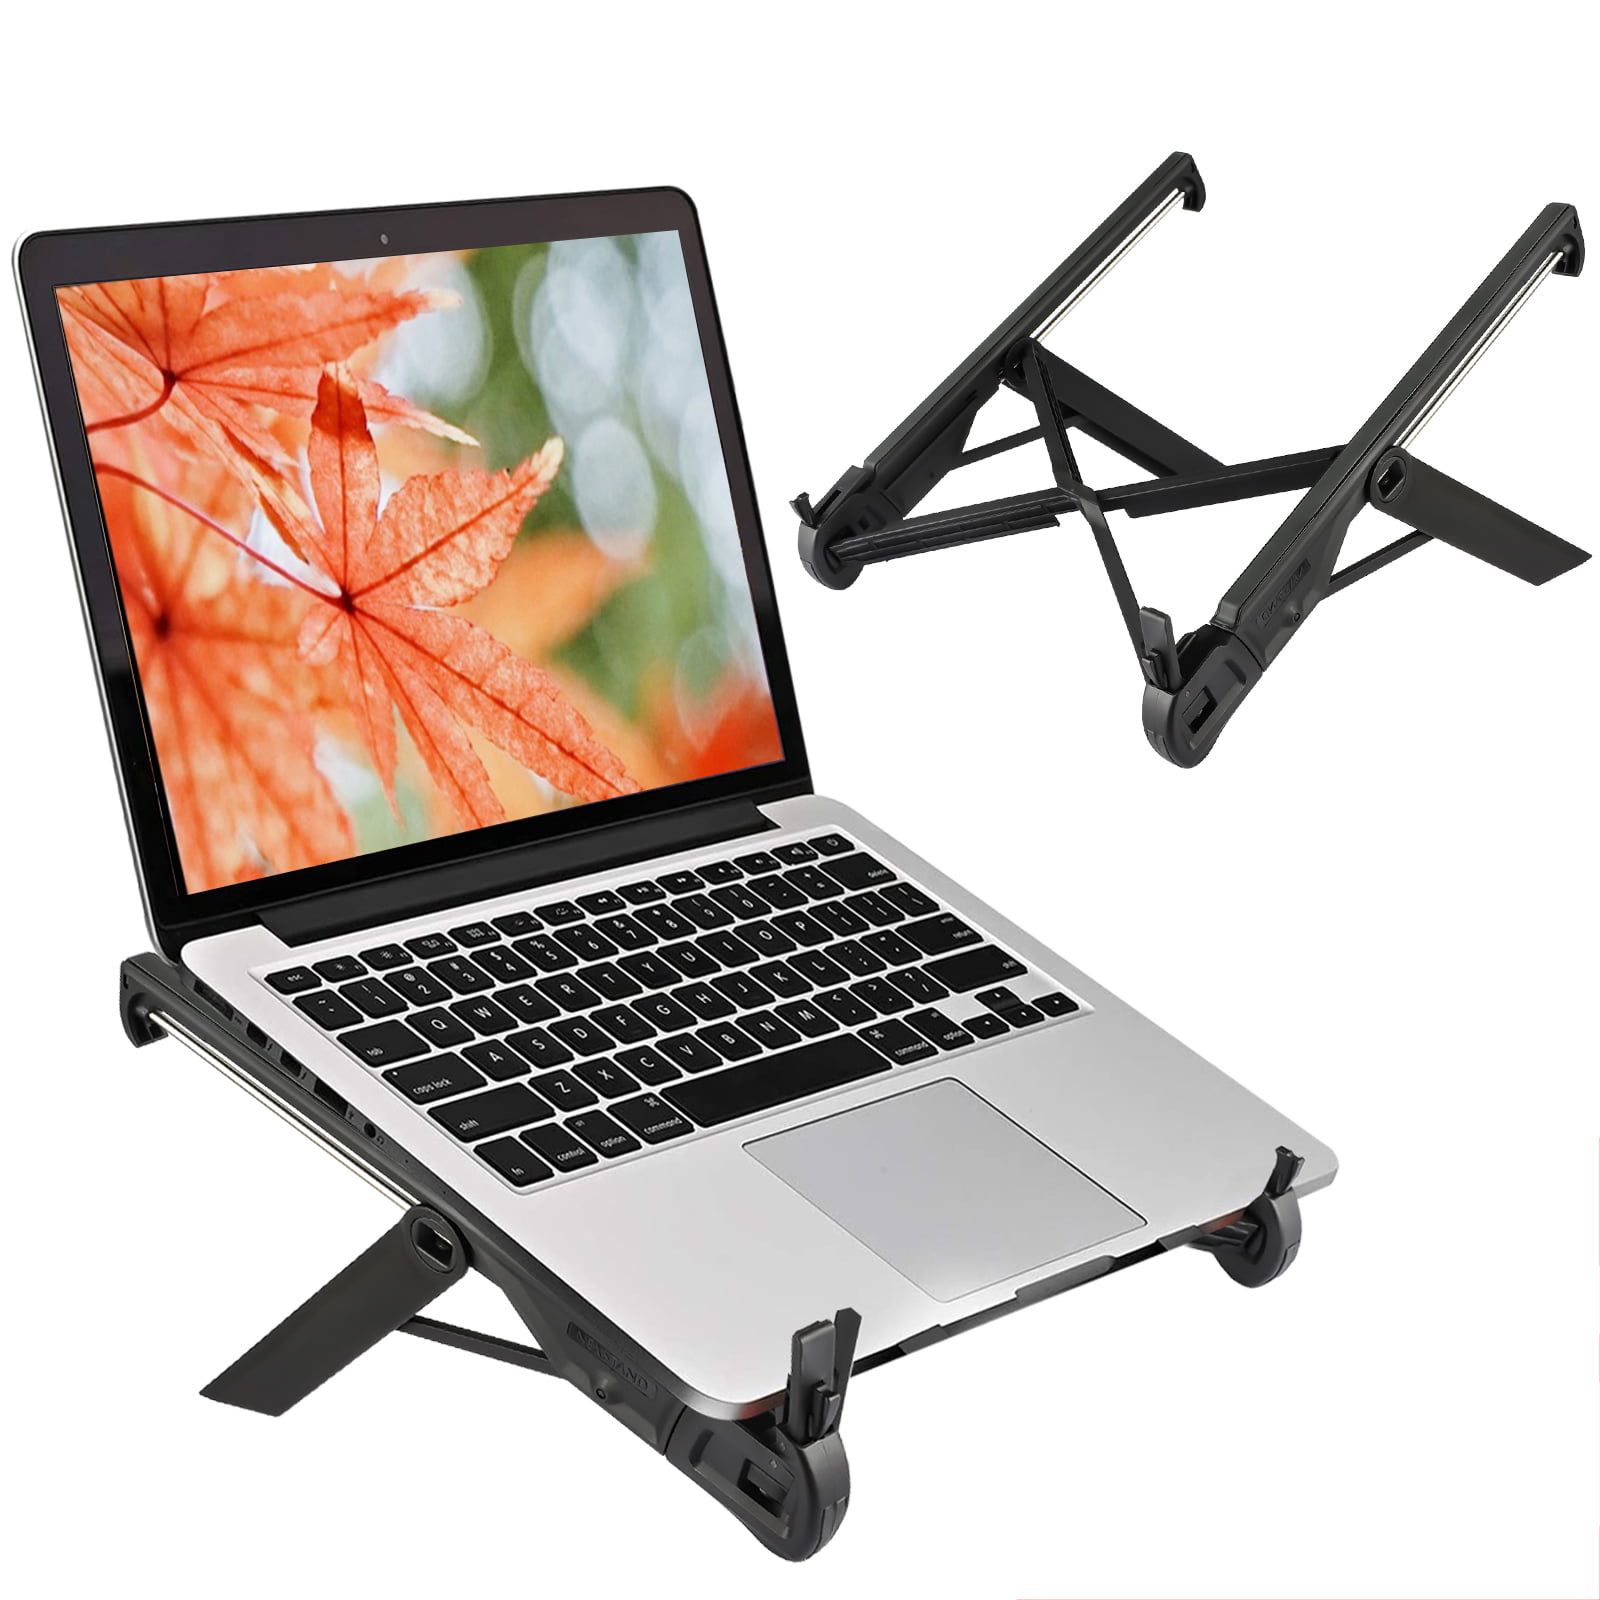 HIOD Foldable Laptop Stand Computer Notebook Desk Tray Adjustable Portable Support Lightweight Ventilation 